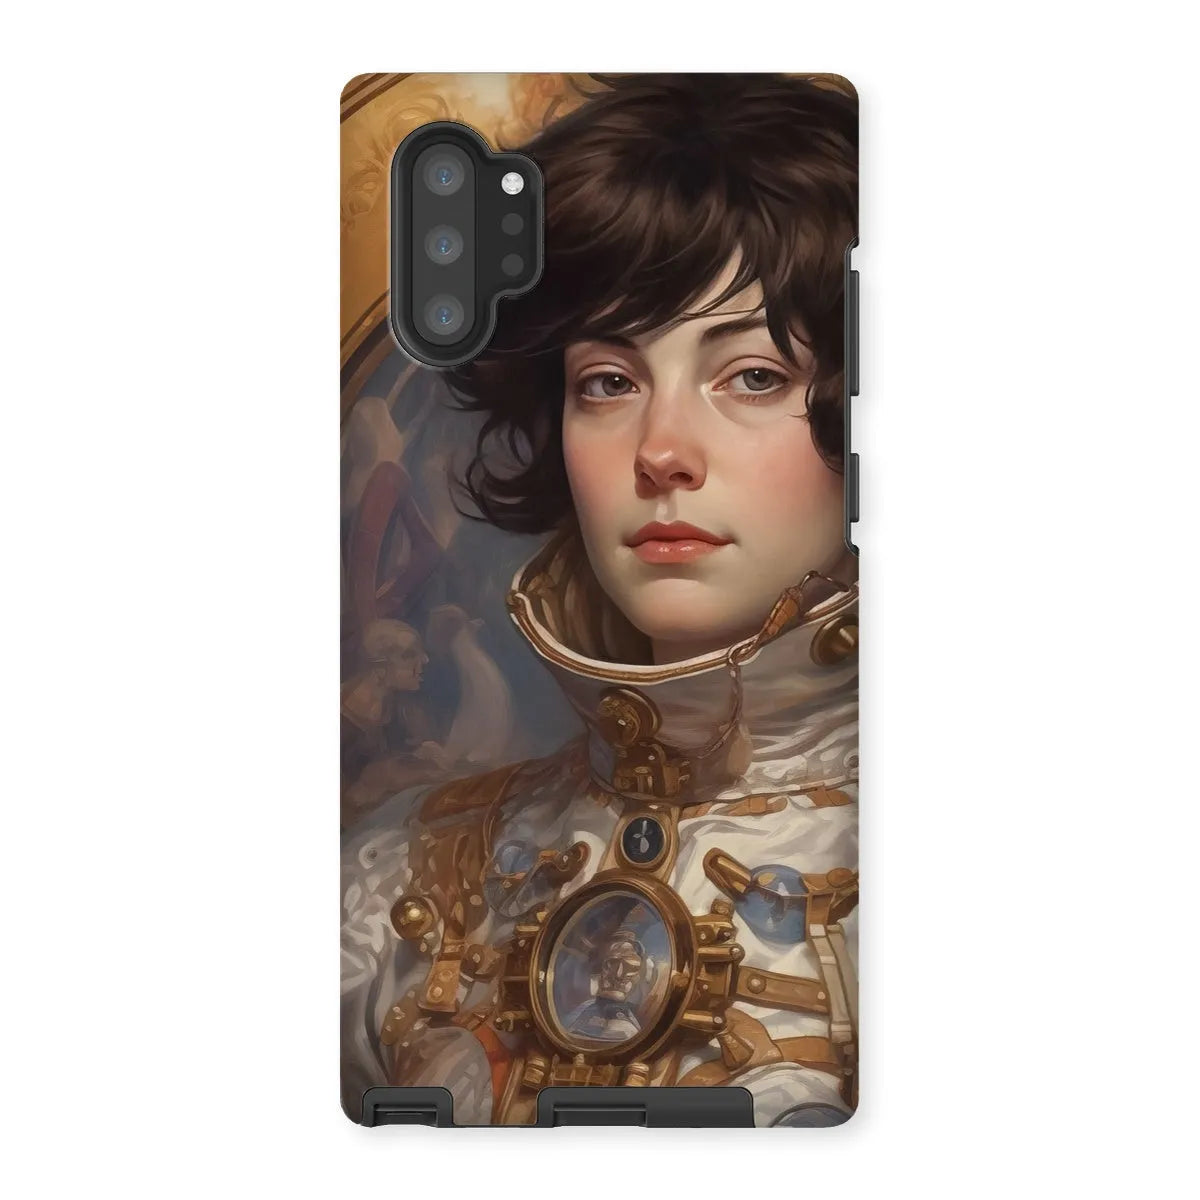 Chloé The Lesbian Astronaut - Space Aesthetic Art Phone Case - Samsung Galaxy Note 10p / Matte - Mobile Phone Cases